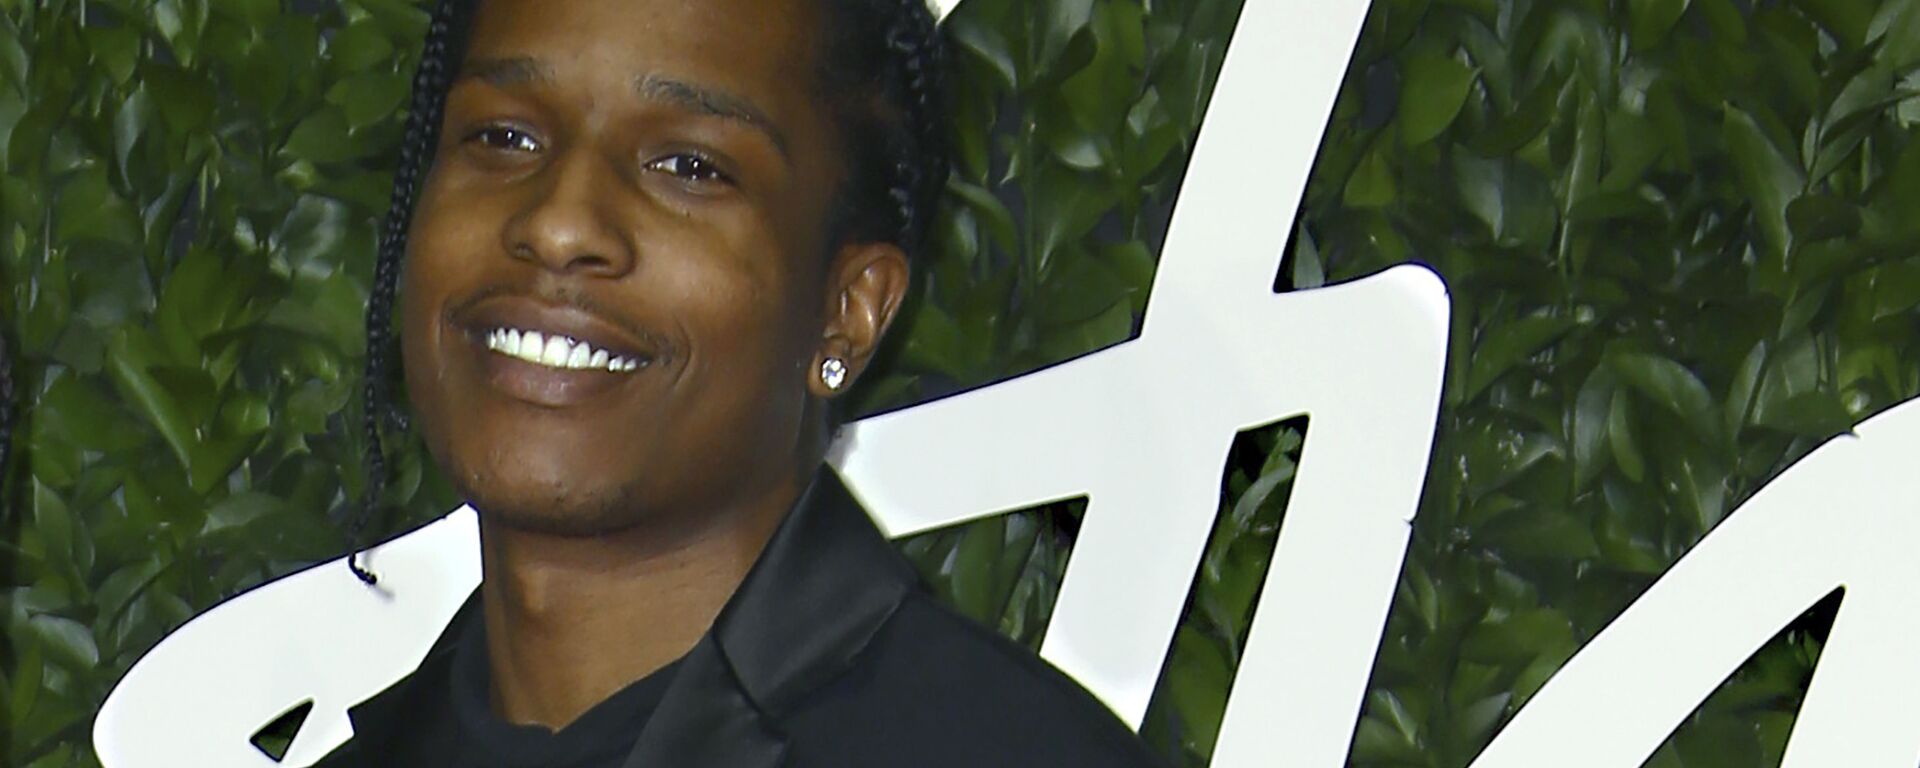 n this file photo dated Monday, Dec. 2, 2019, ASAP Rocky poses for photographers upon arrival at the British Fashion Awards in central London.  - Sputnik International, 1920, 16.08.2022